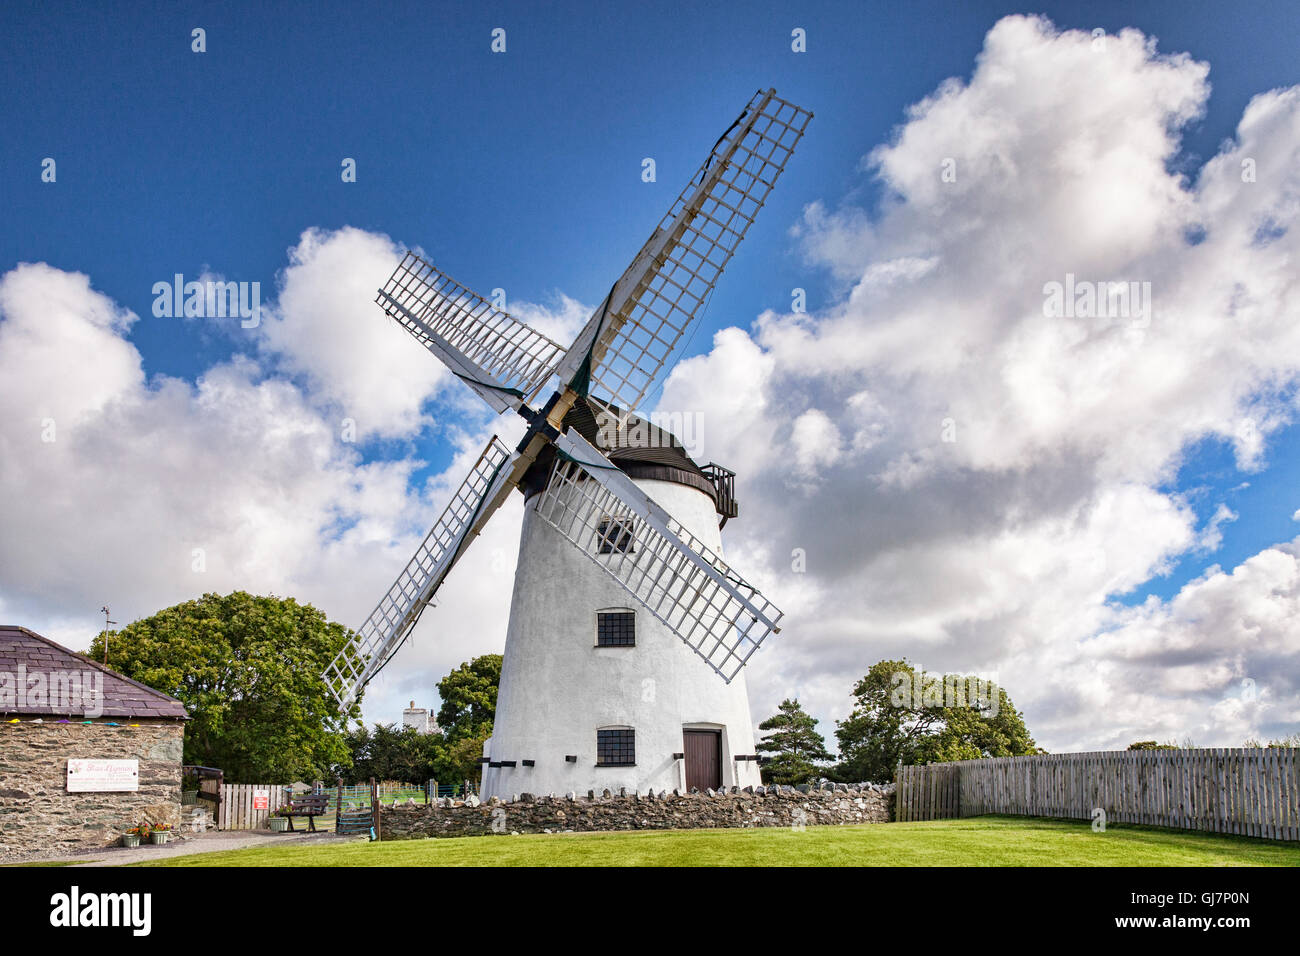 Melin Llynnon, a fully restored and operational windmill on Anglesey, Wales, UK, Cracks and discoloration removed. Stock Photo